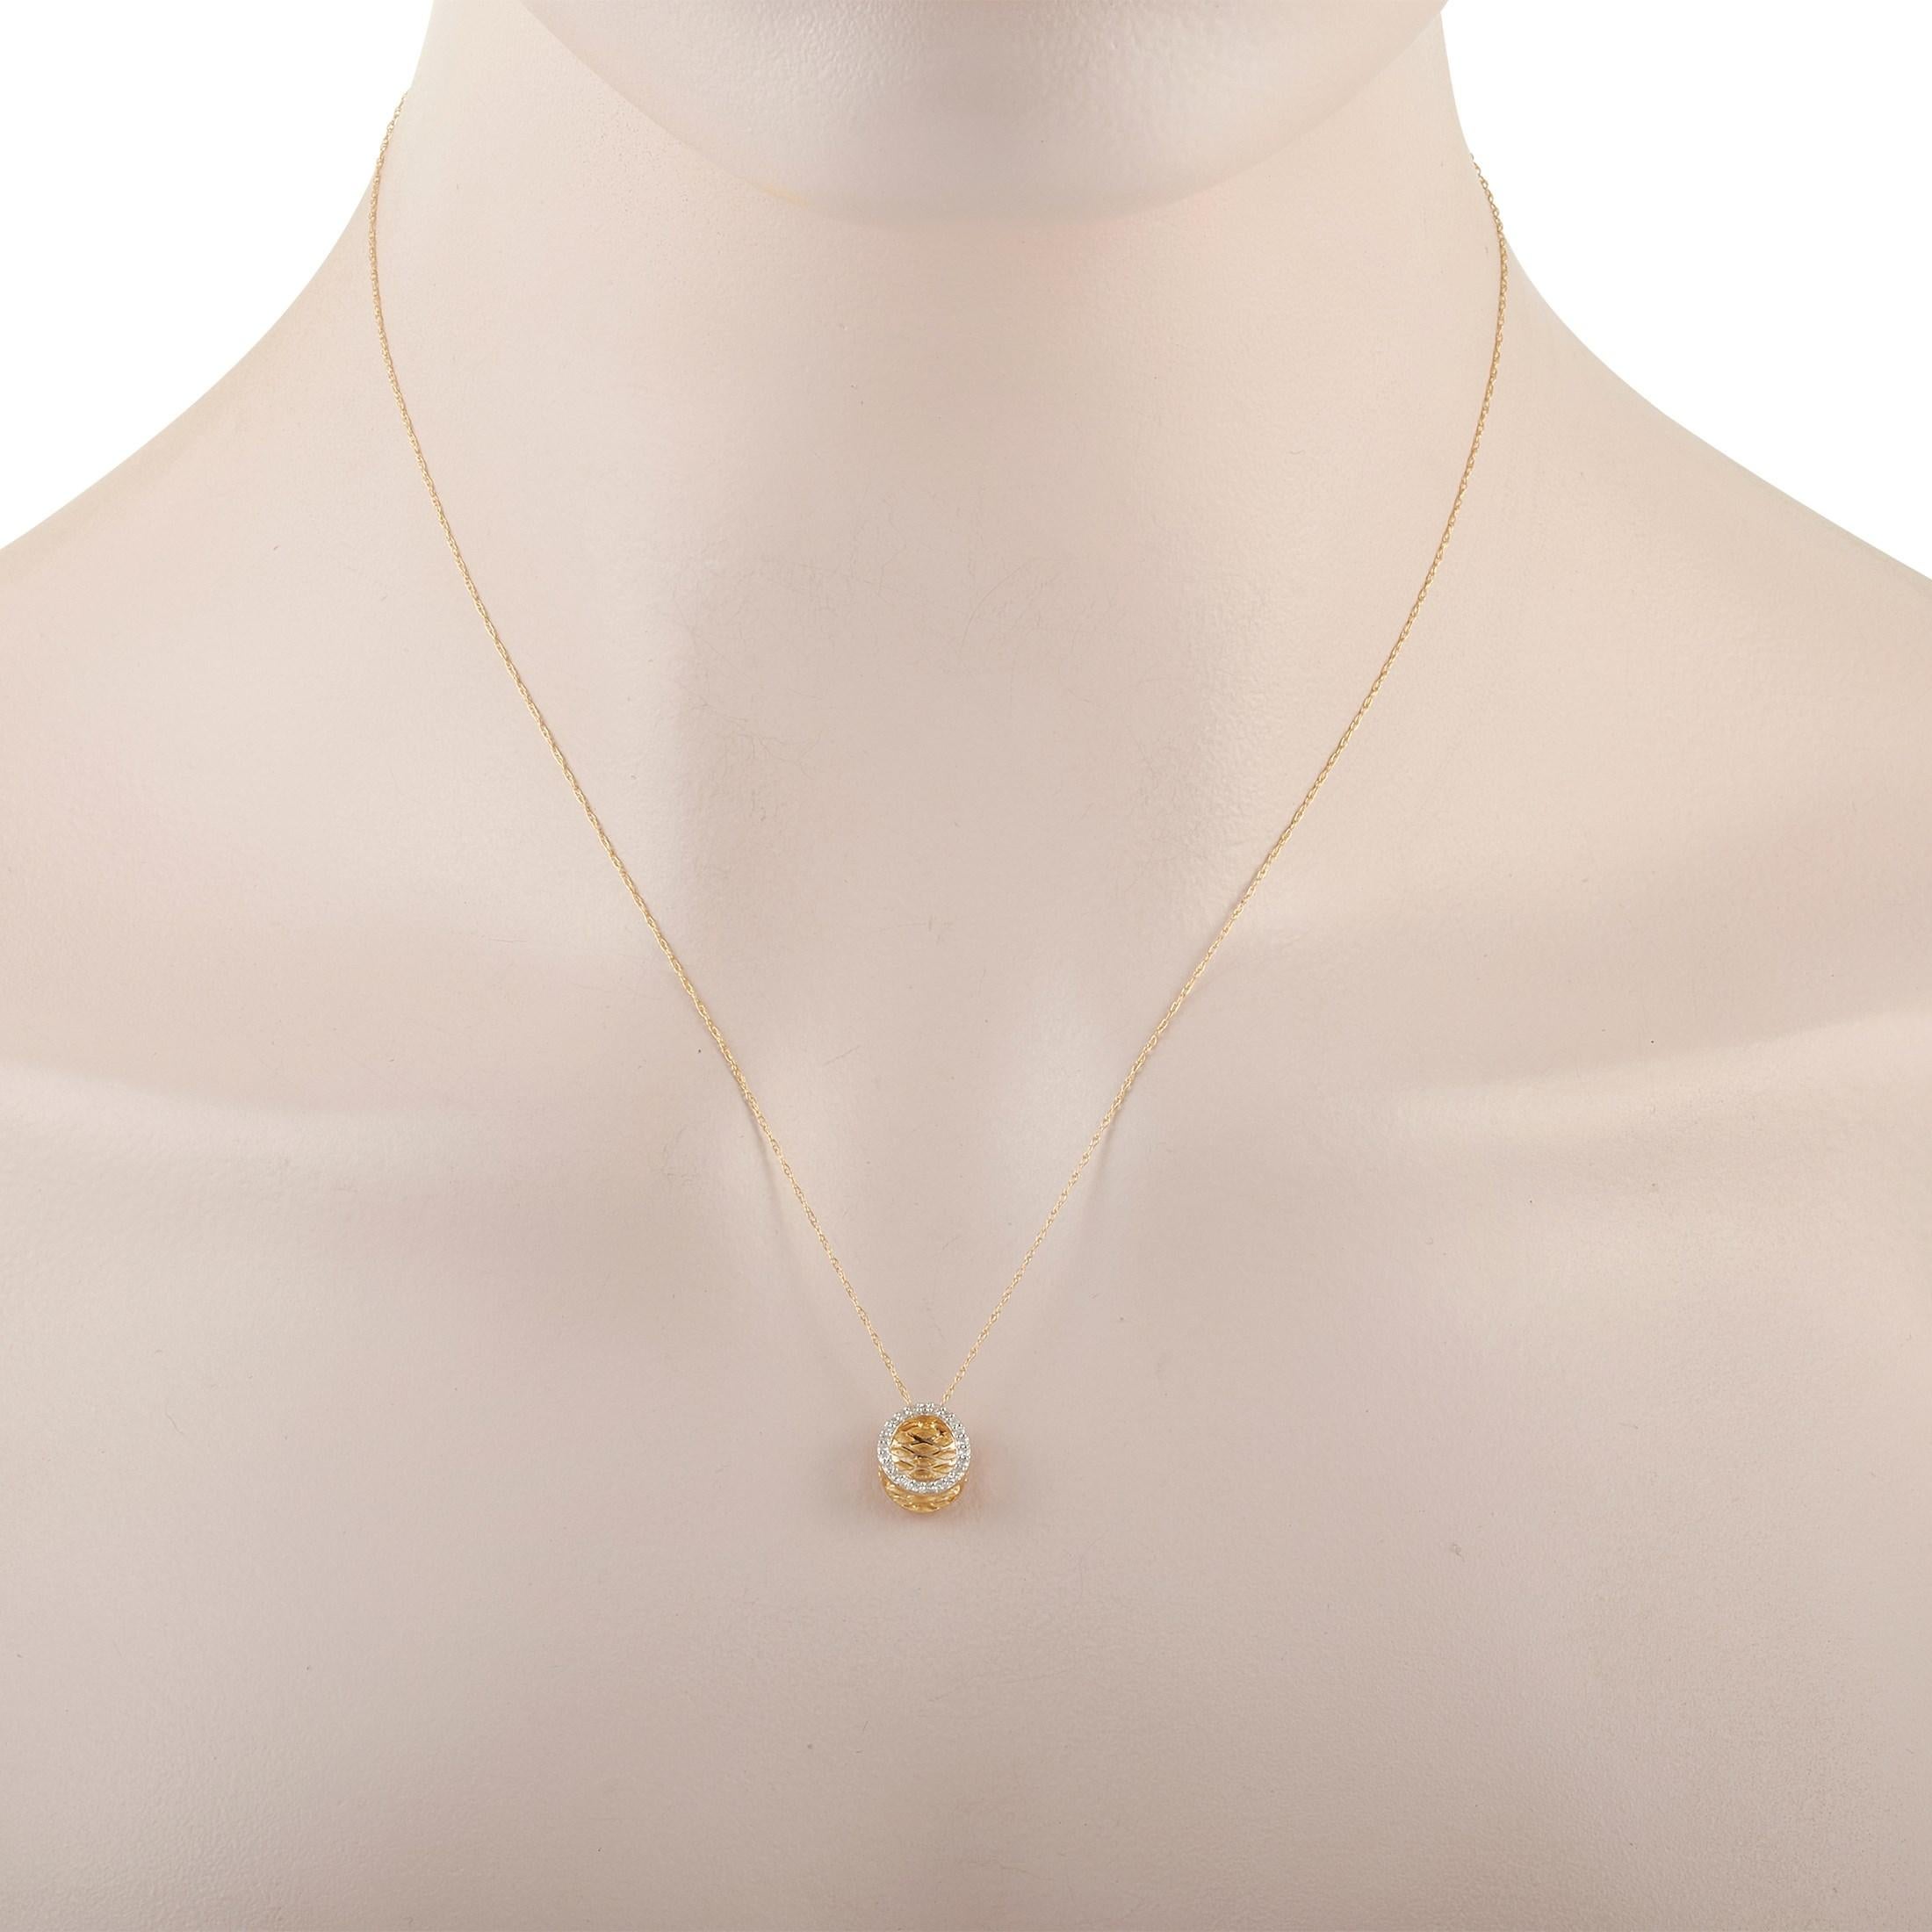 This LB Exclusive 14K Yellow Gold 0.10 ct Diamond Necklace features a delicate 14K Yellow Gold chain measuring 17 inches in length. The necklace features a matching 14K Yellow Gold Oval Pendant embossed with horizontal diamond shapes and set with